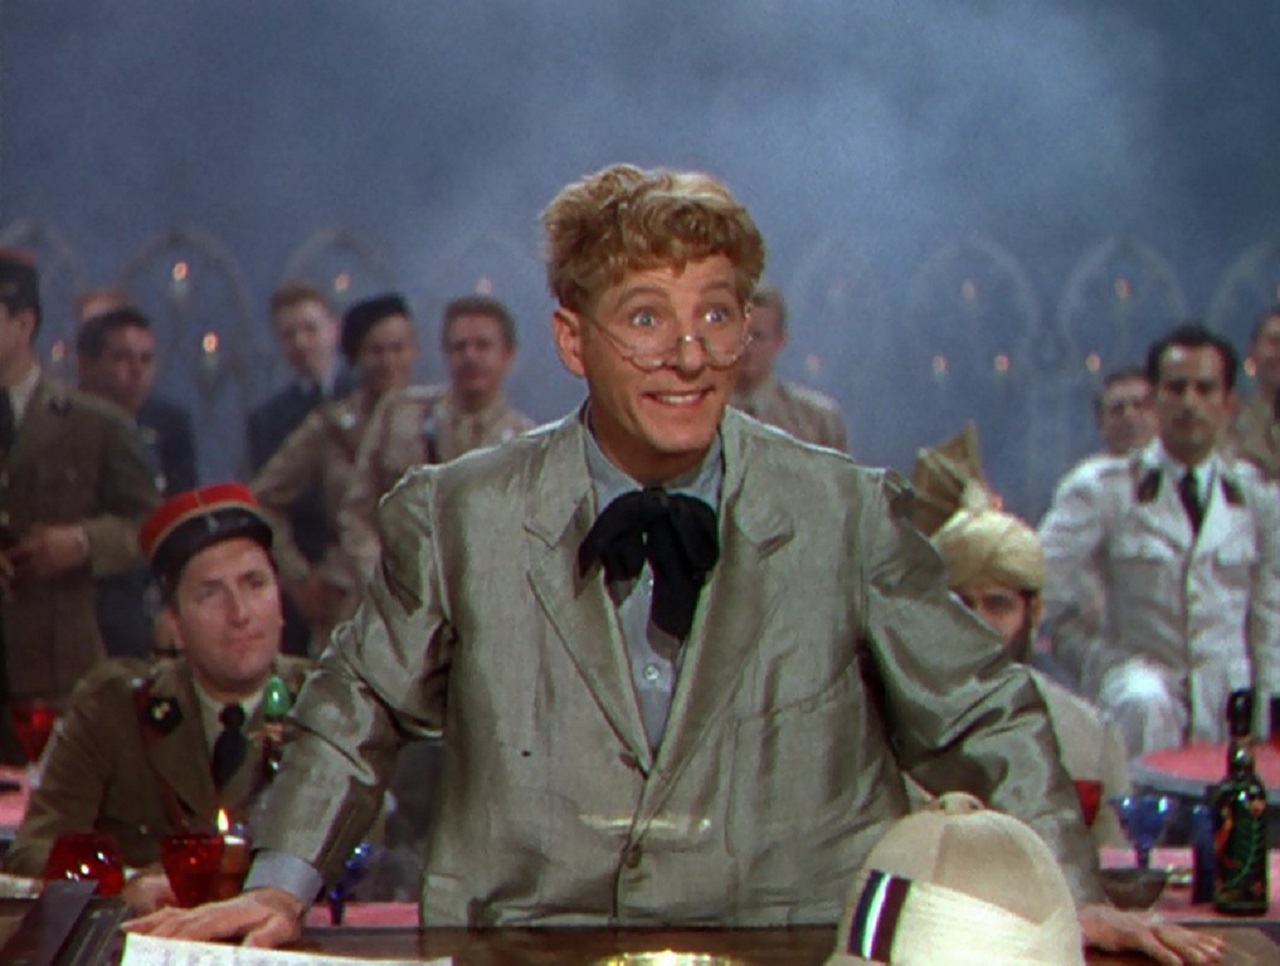 Danny Kaye in a daydream fantasy in The Secret Life of Walter Mitty (1947)